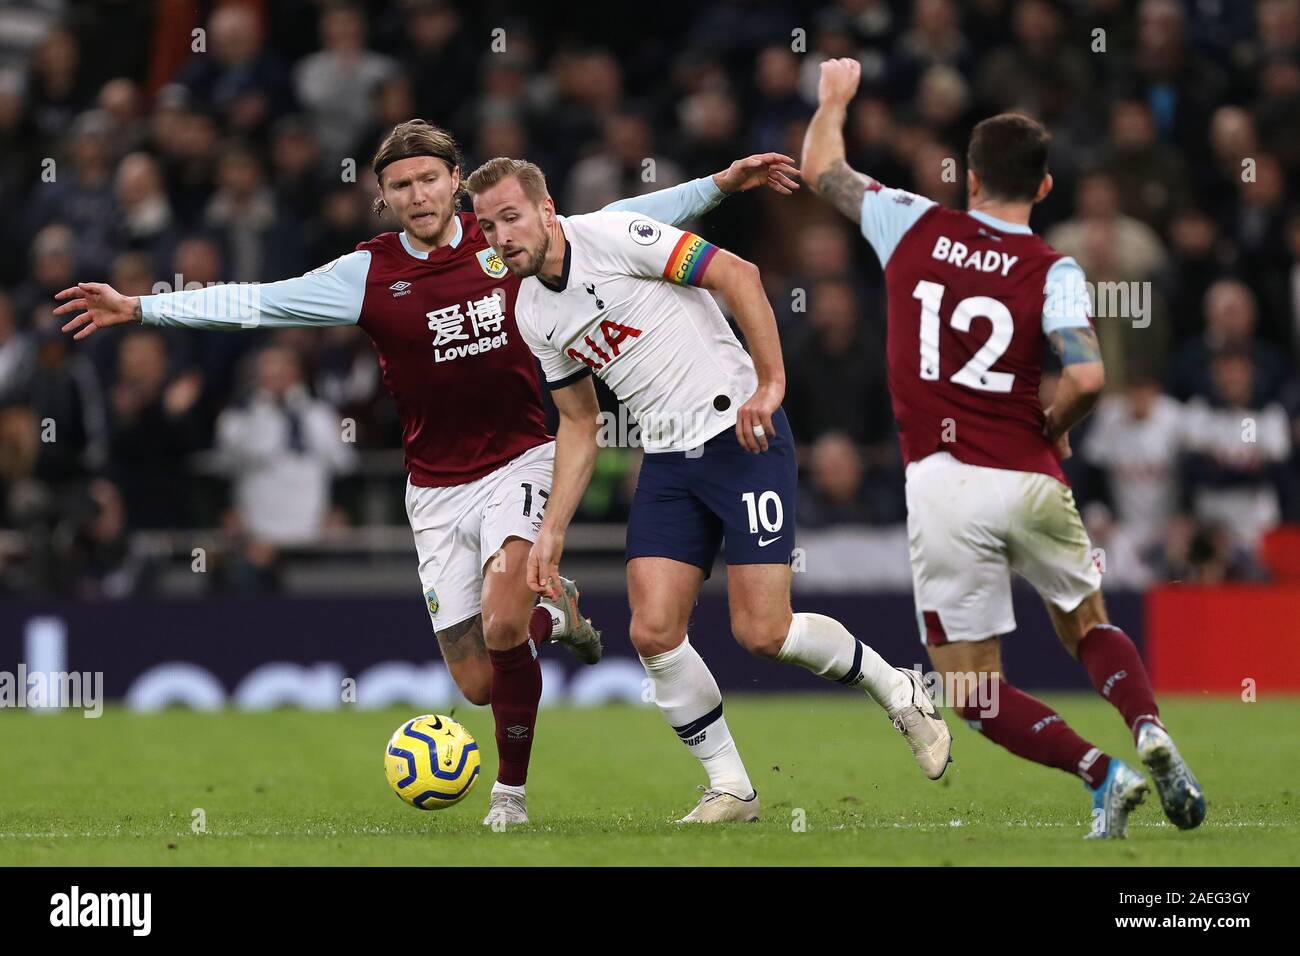 Harry Kane of Tottenham Hotspur in action with Jeff Hendrick (L) and Robbie Brady (R) of Burnley - Tottenham Hotspur v Burnley, Premier League, Tottenham Hotspur Stadium, London, UK - 7th December 2019  Editorial Use Only - DataCo restrictions apply Stock Photo